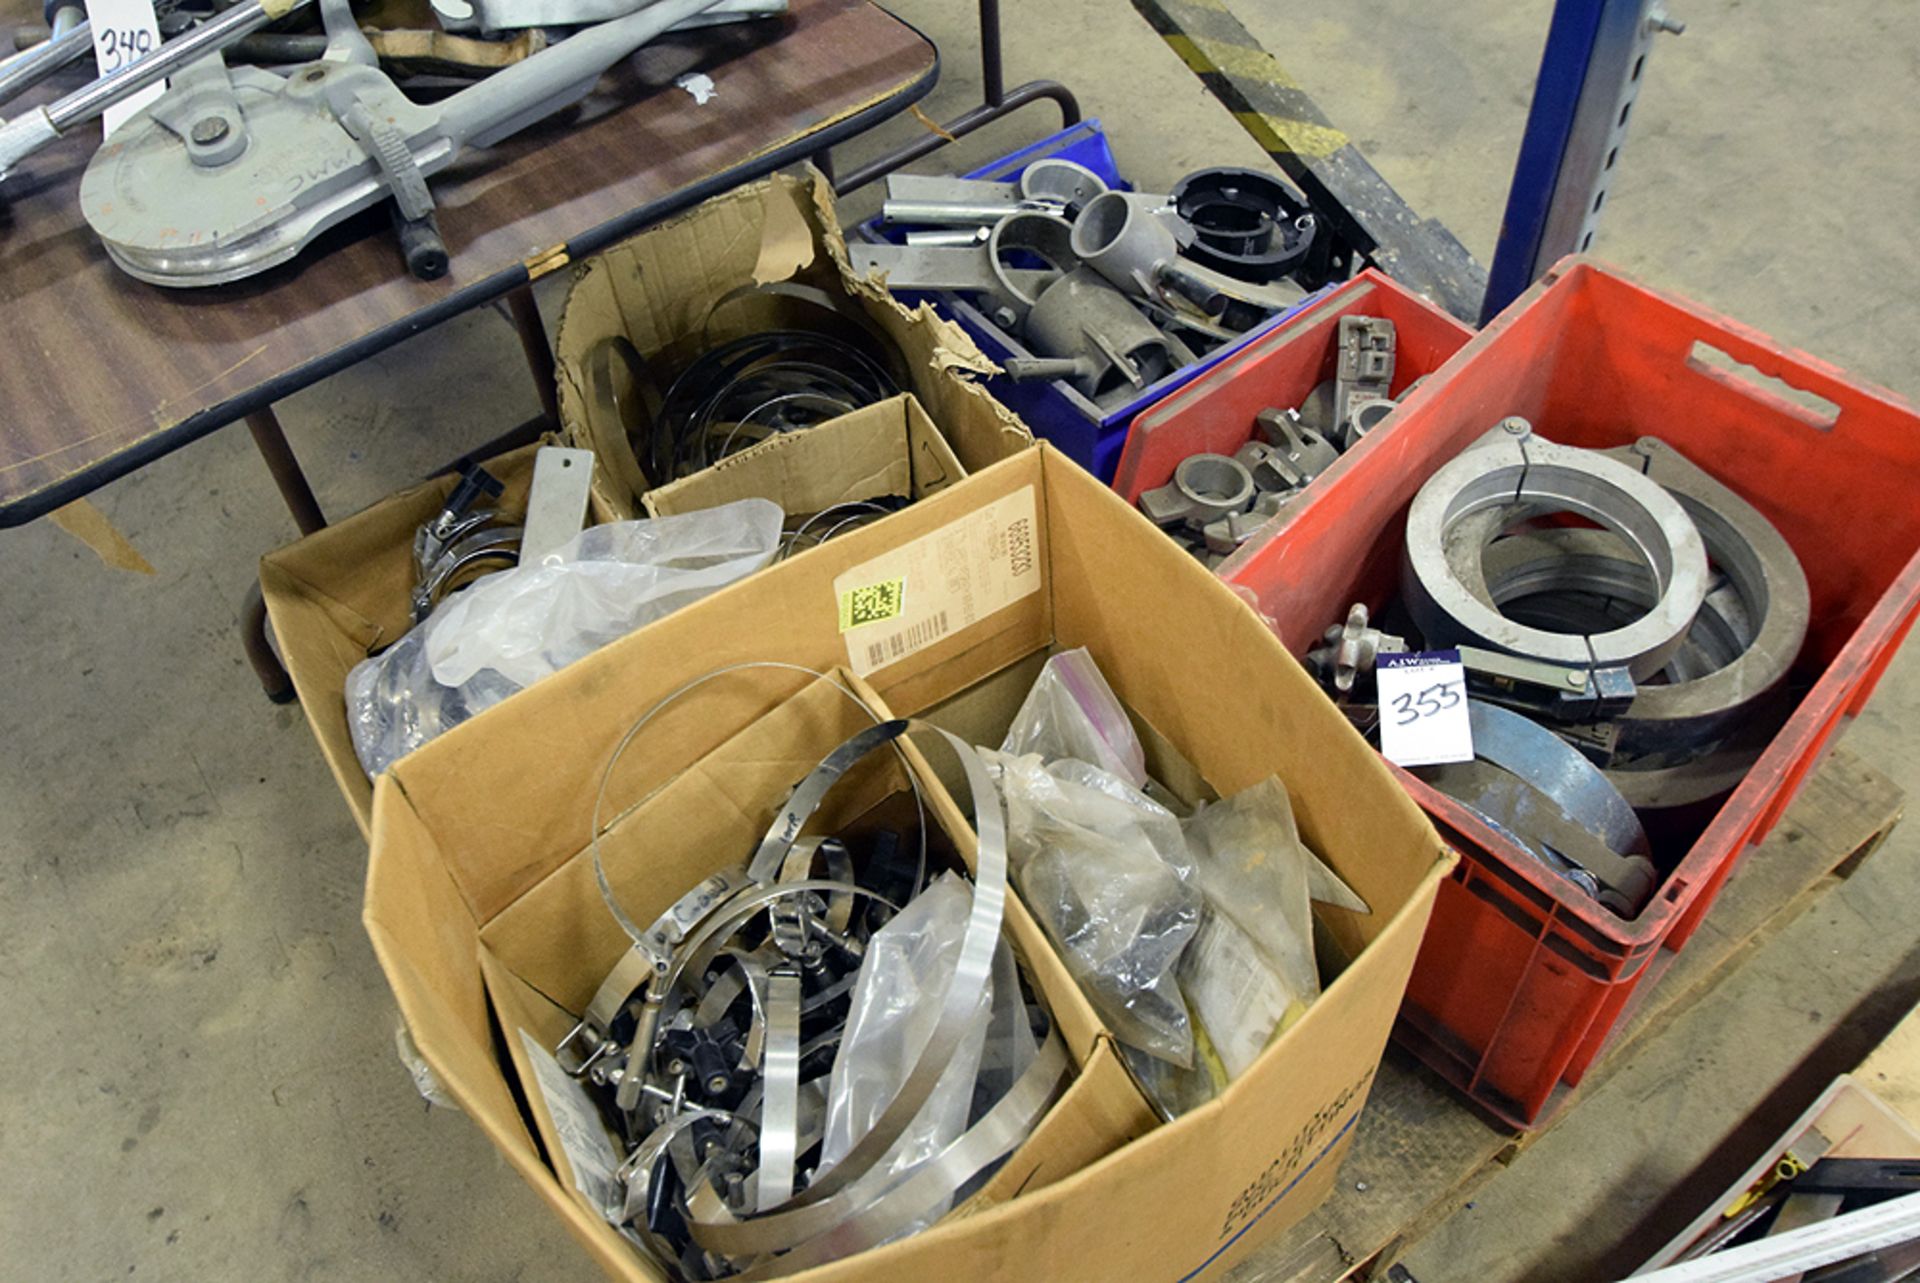 A Large Assortment of Pipe Clamps and Braces